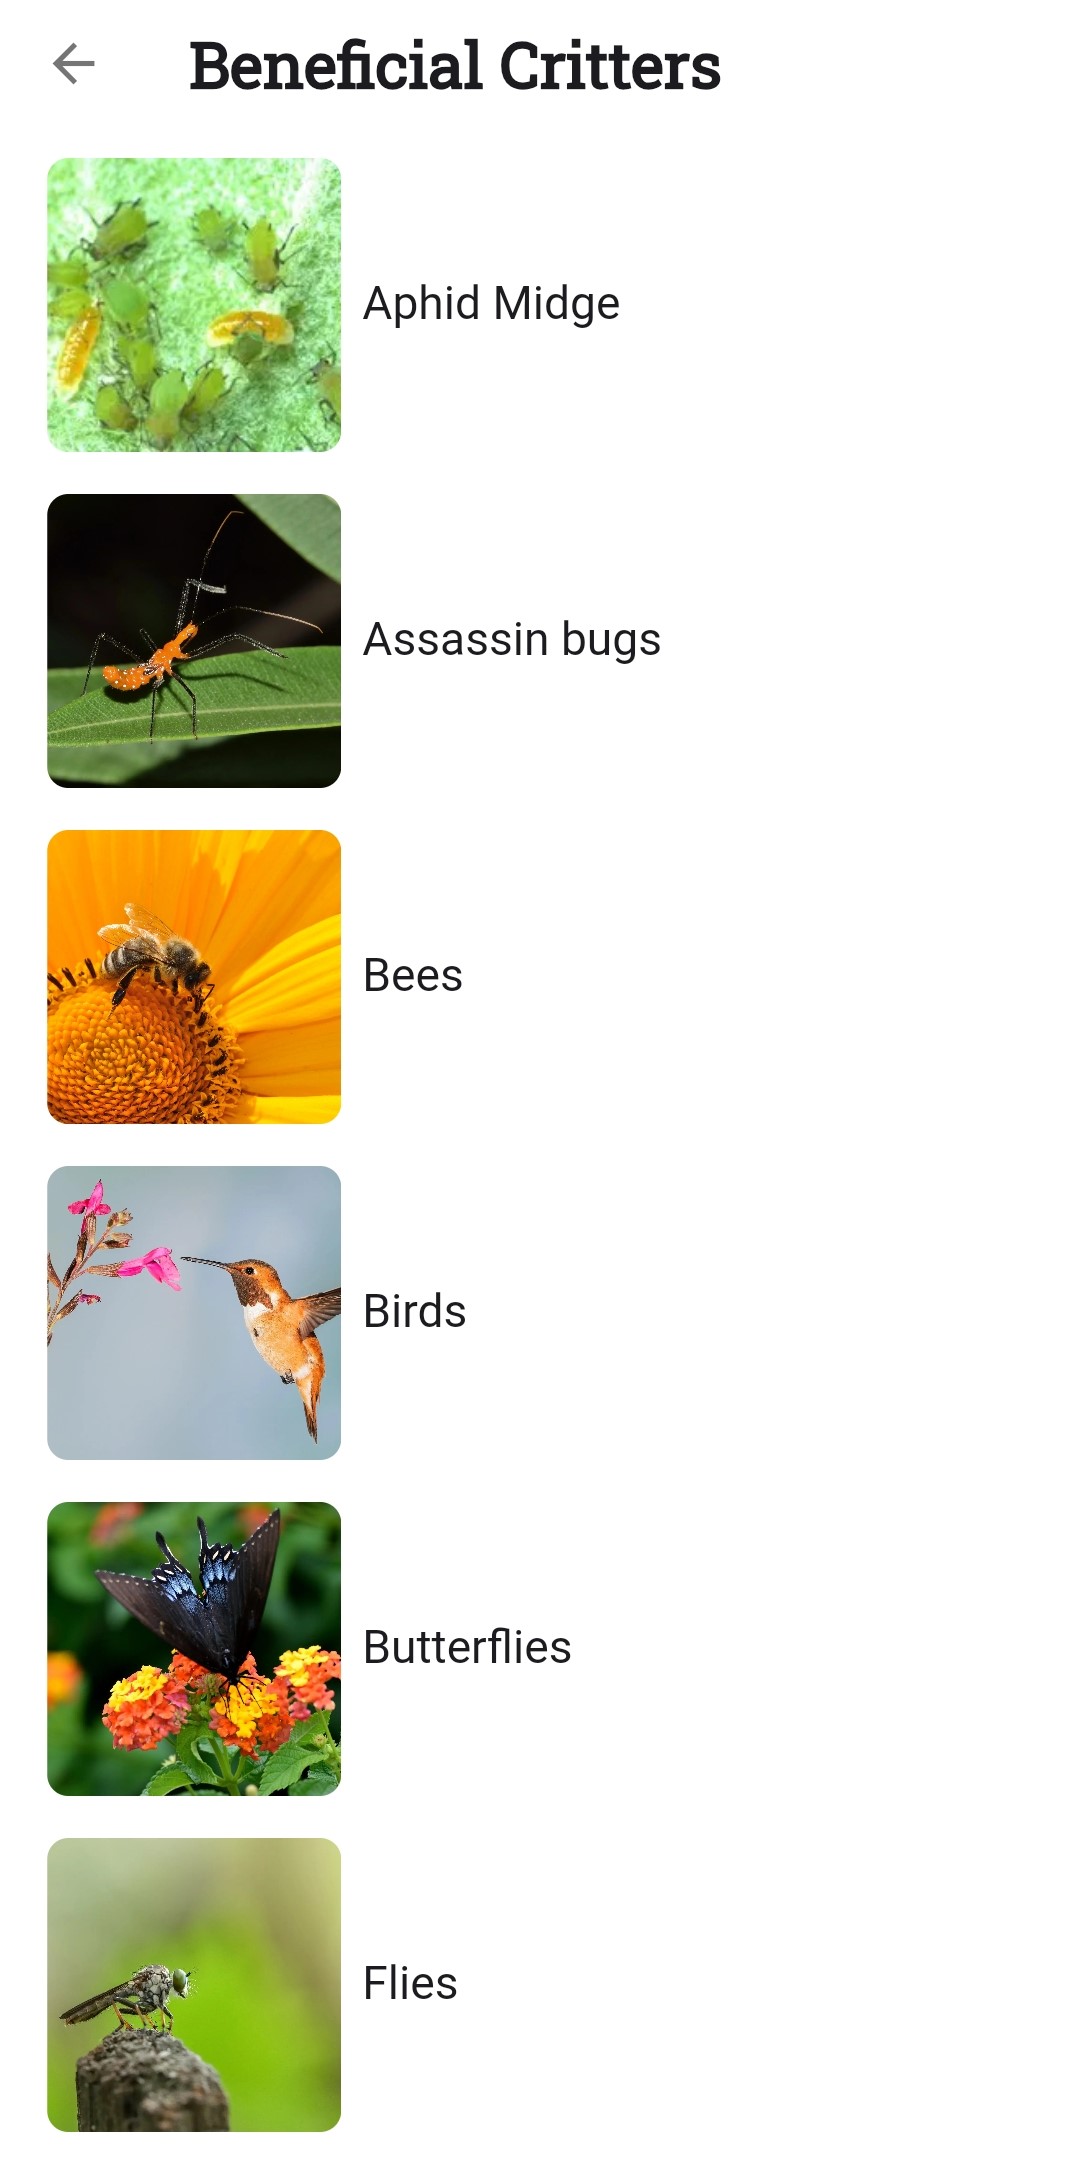 Screenshot of the list of beneficial critters